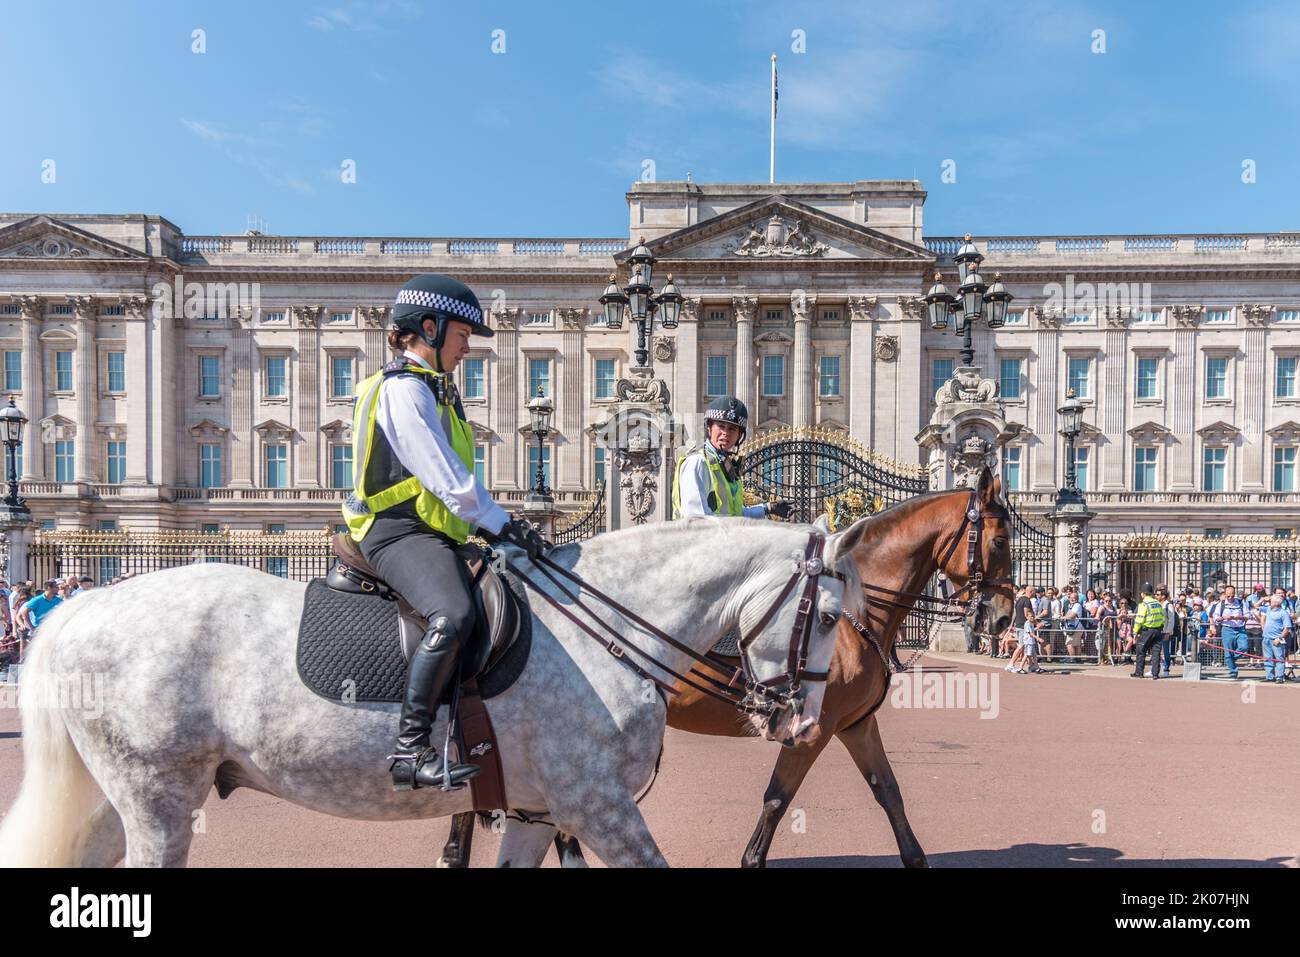 Policemen officers on horseback at the Royal Buckingham Palace during the changing the guard Stock Photo